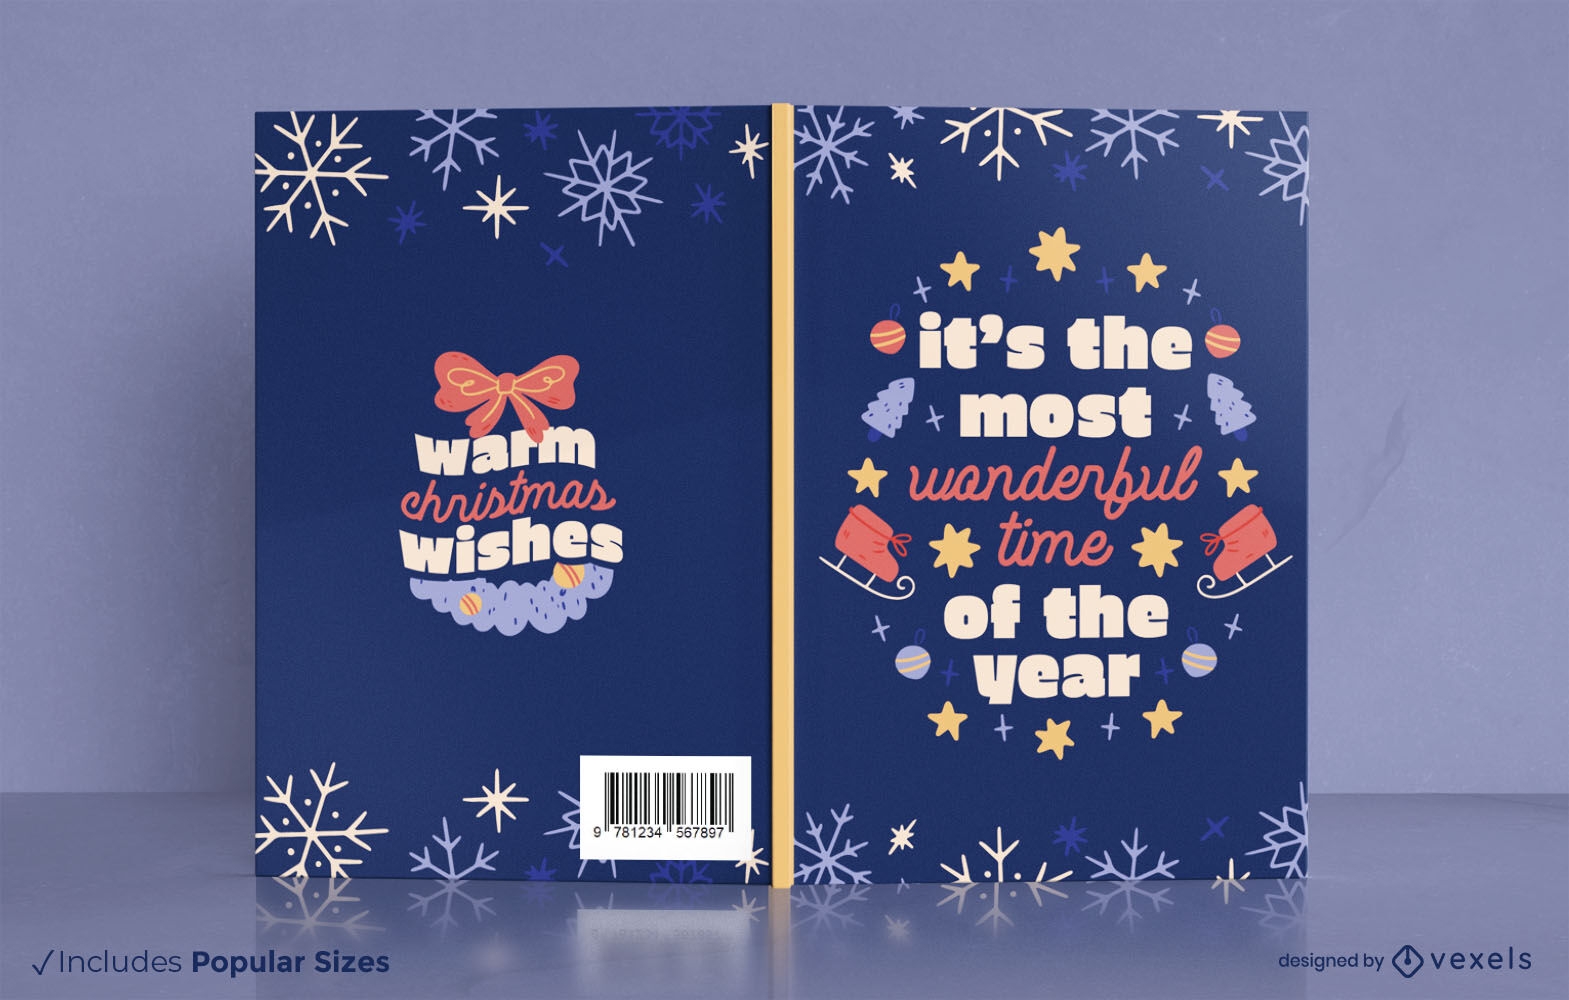 Christmas wonderful time book cover design